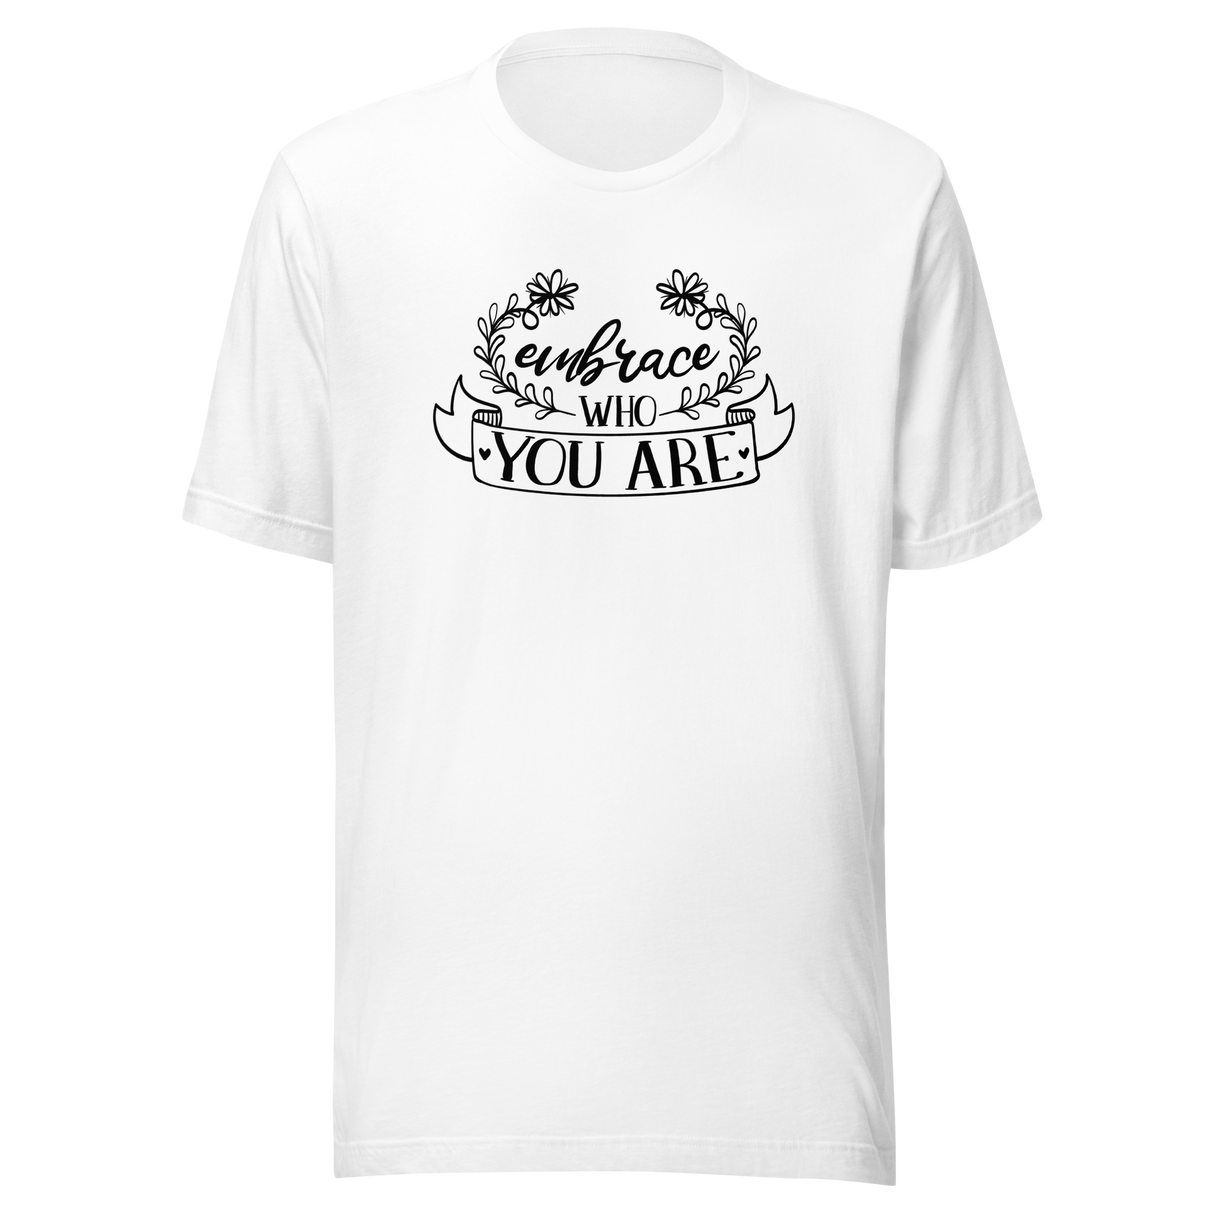 embrace-who-you-are-embrace-who-you-are-tee-be-unique-t-shirt-embrace-yourself-tee-inspirational-t-shirt-motivation-tee#color_white